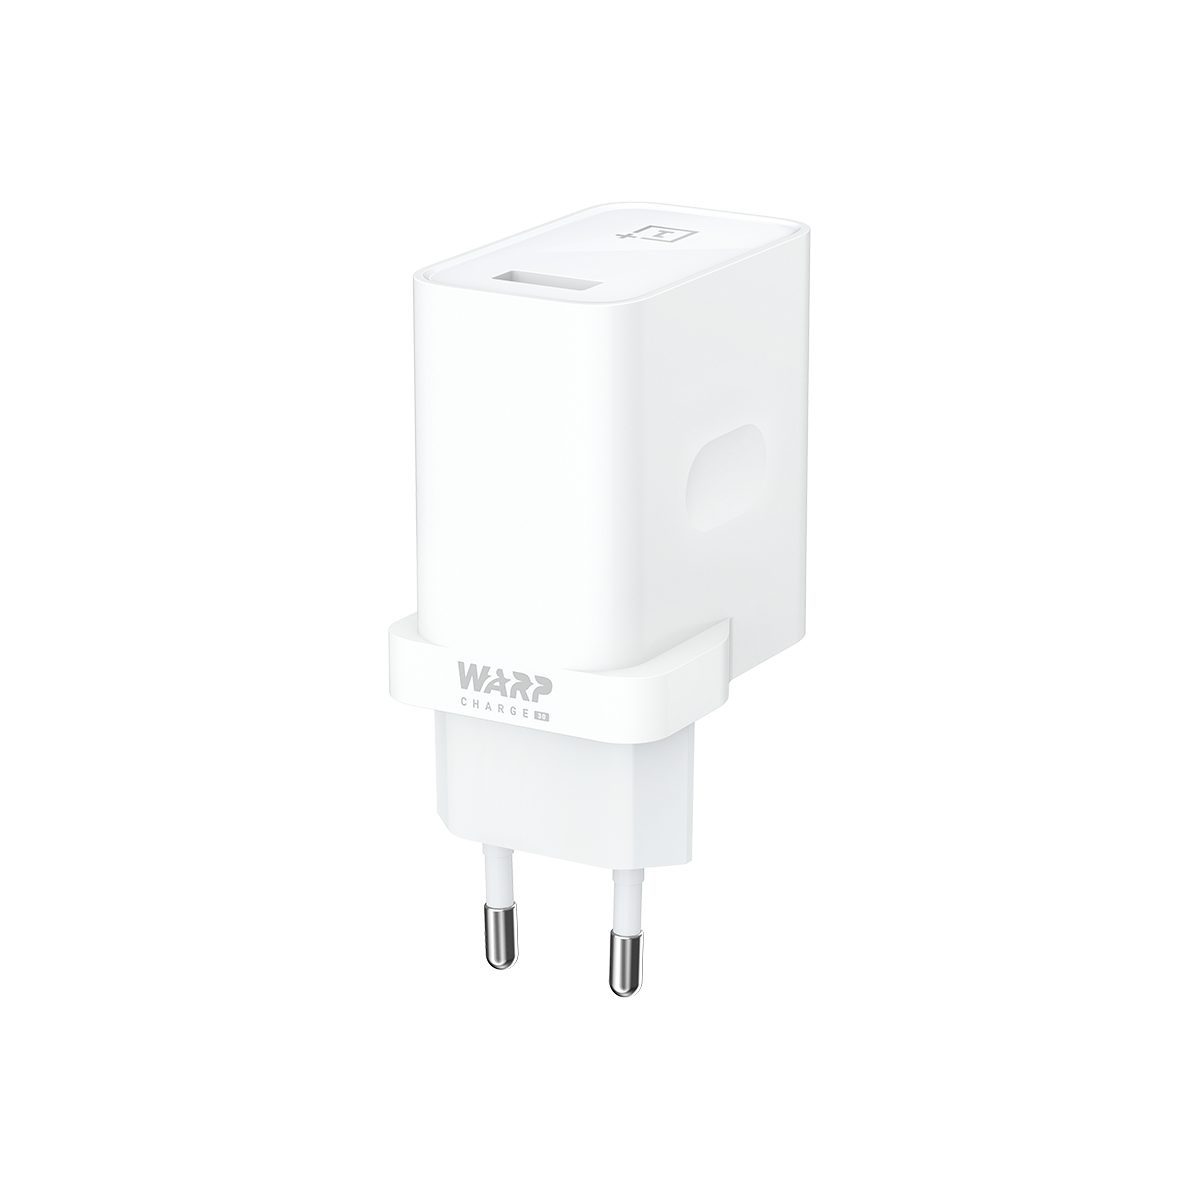 OnePlus 30W Warp Charge USB Wall Charger Adapter Met US Plug EU Plug Voor OnePlus 8 OnePlus 8 Pro vo